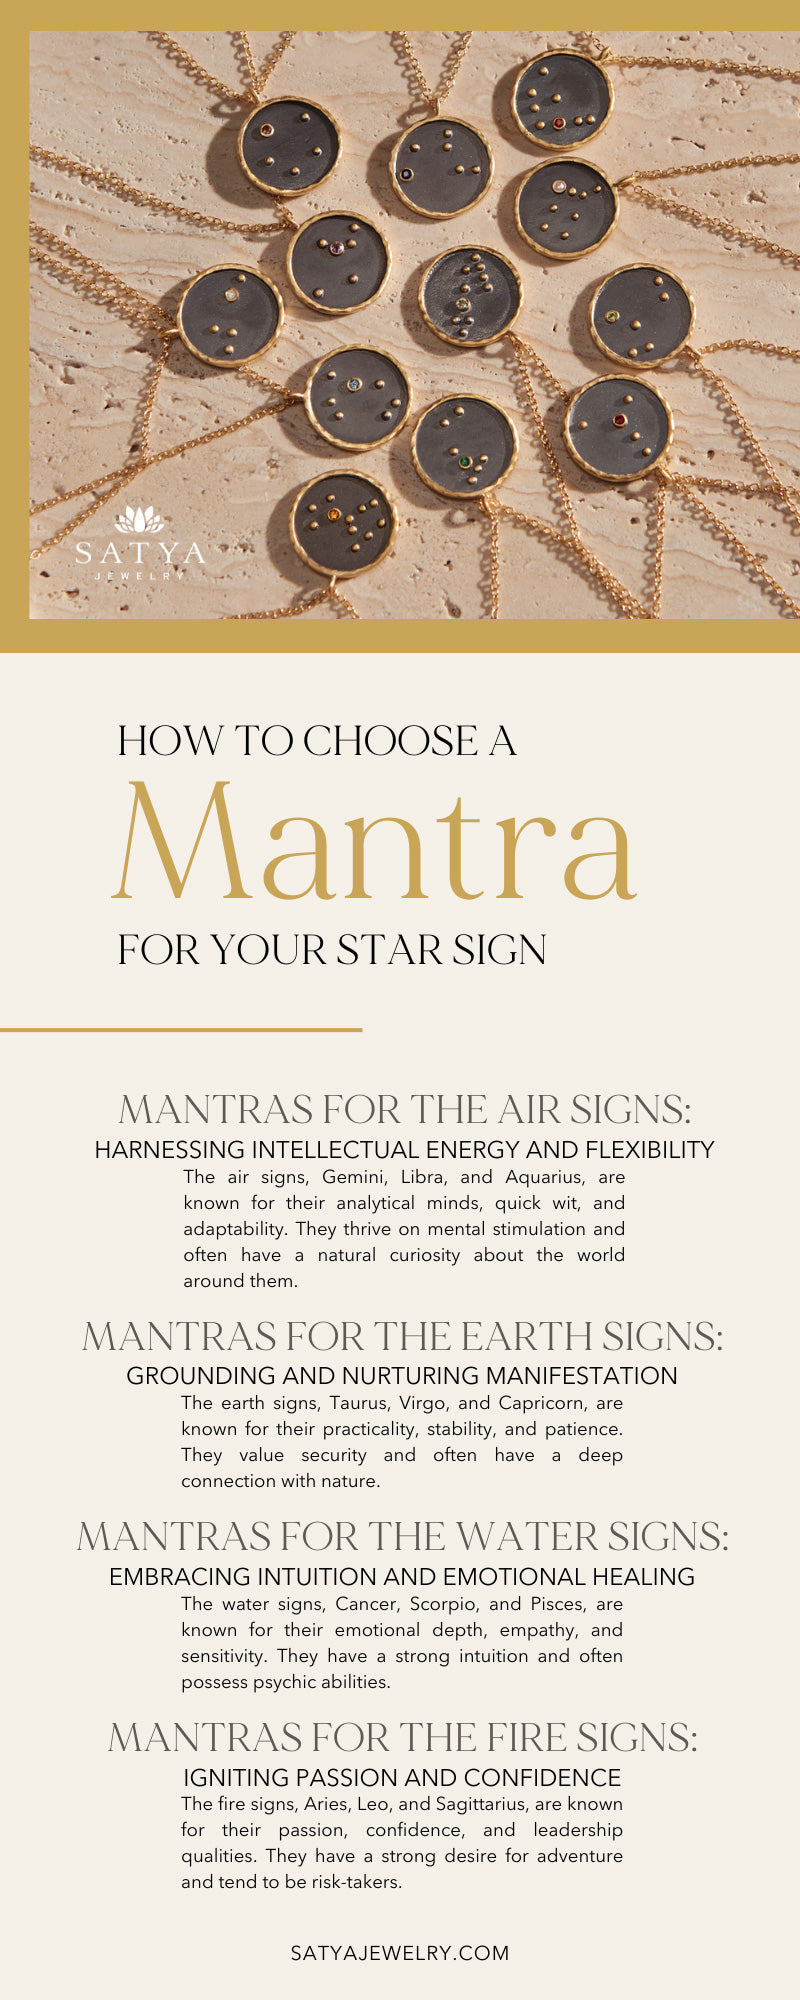 How To Choose a Mantra for Your Star Sign